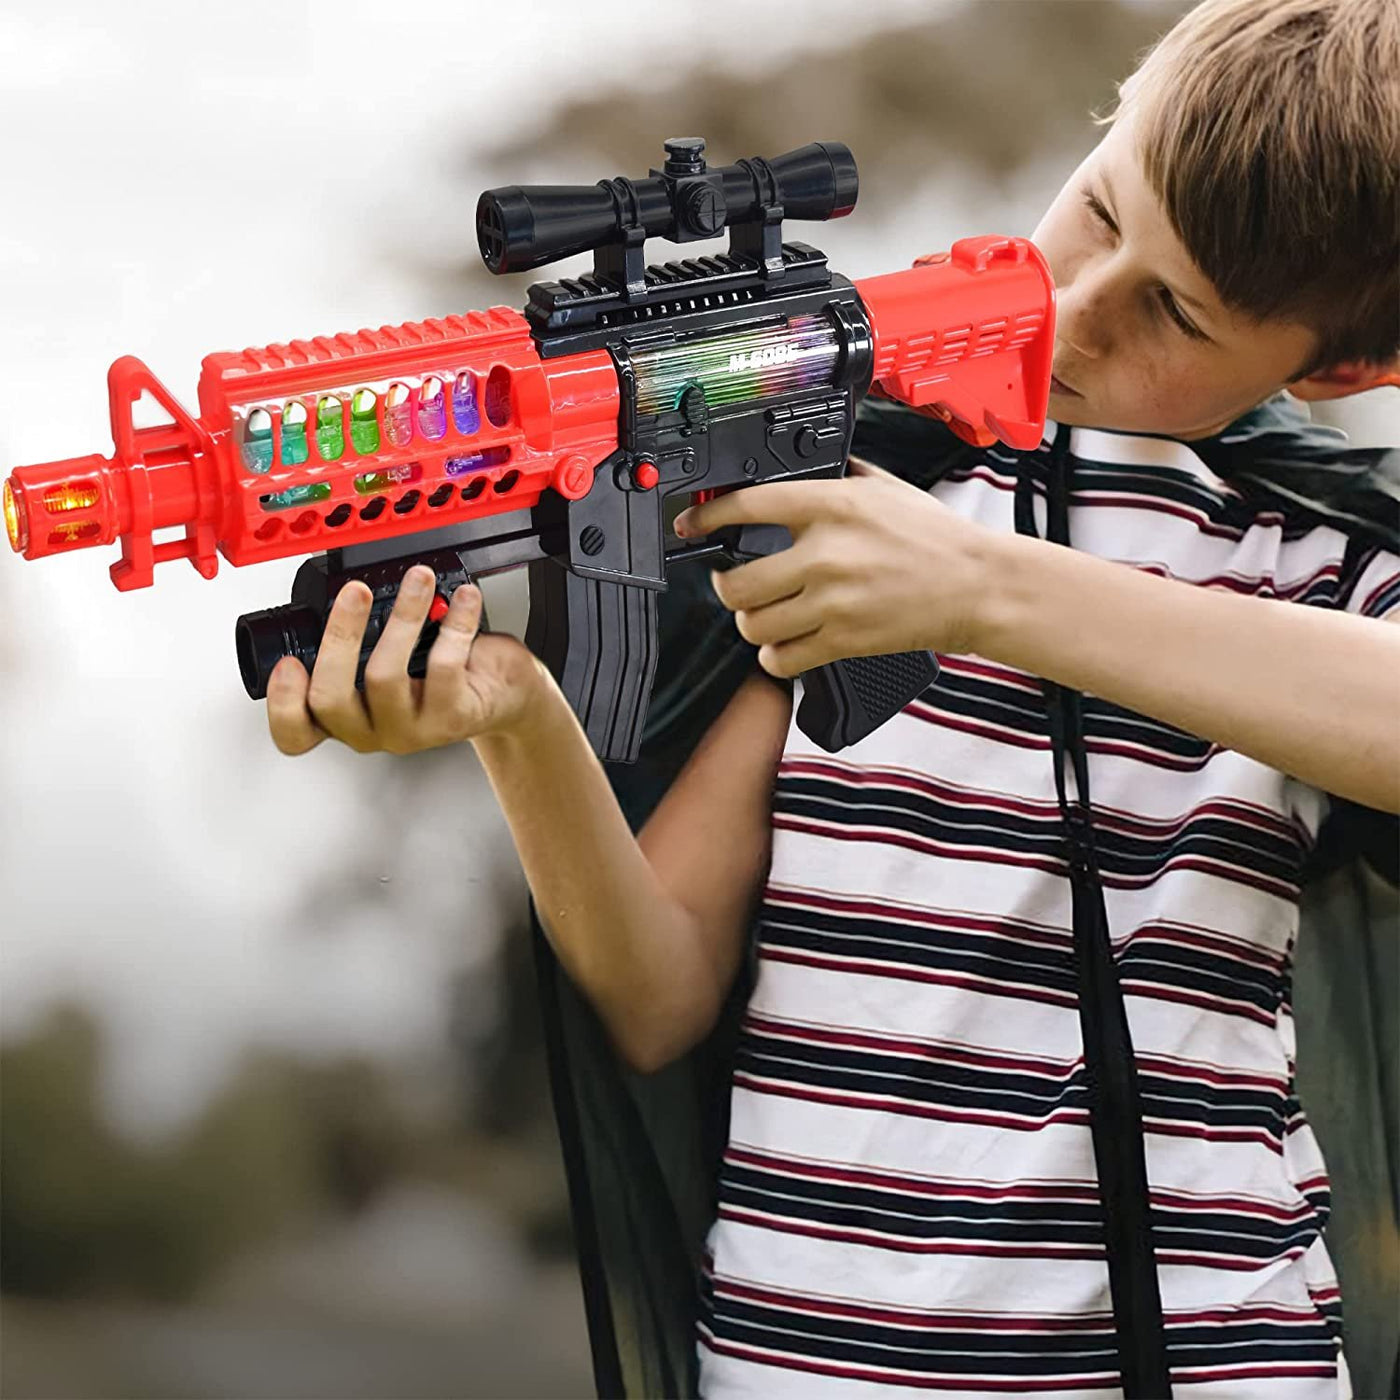 Artcreativty Toy Rifle Vibrating Toy Guns for Boys, 13.25" Light Up Fake Gun with Sounds, Immersive Vibration, and Batteries Included, Military Toy Machine Gun, Toy Guns for Boys 8-12